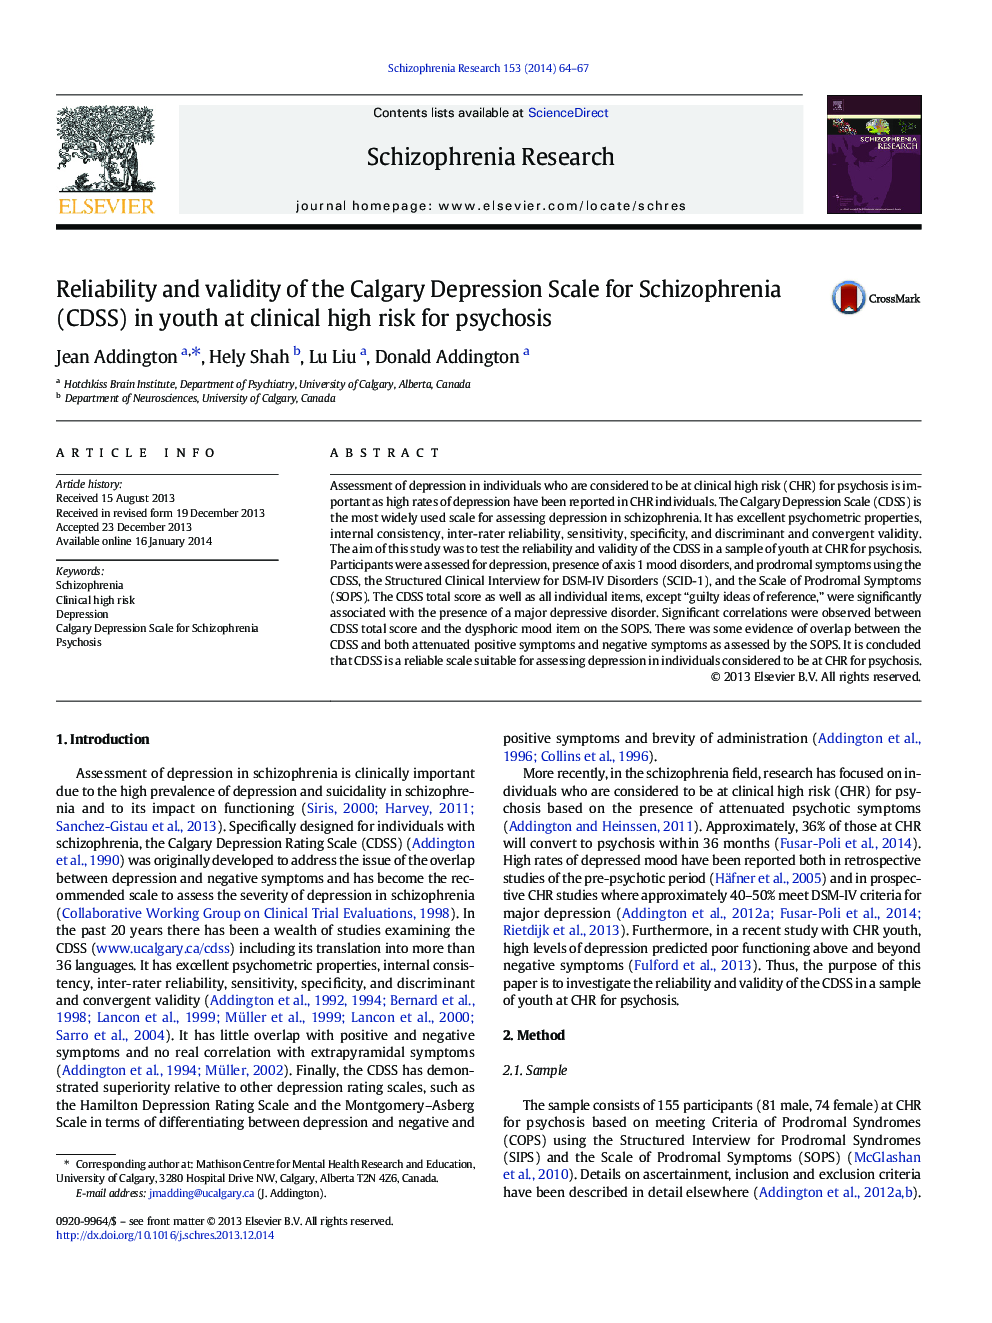 Reliability and validity of the Calgary Depression Scale for Schizophrenia (CDSS) in youth at clinical high risk for psychosis